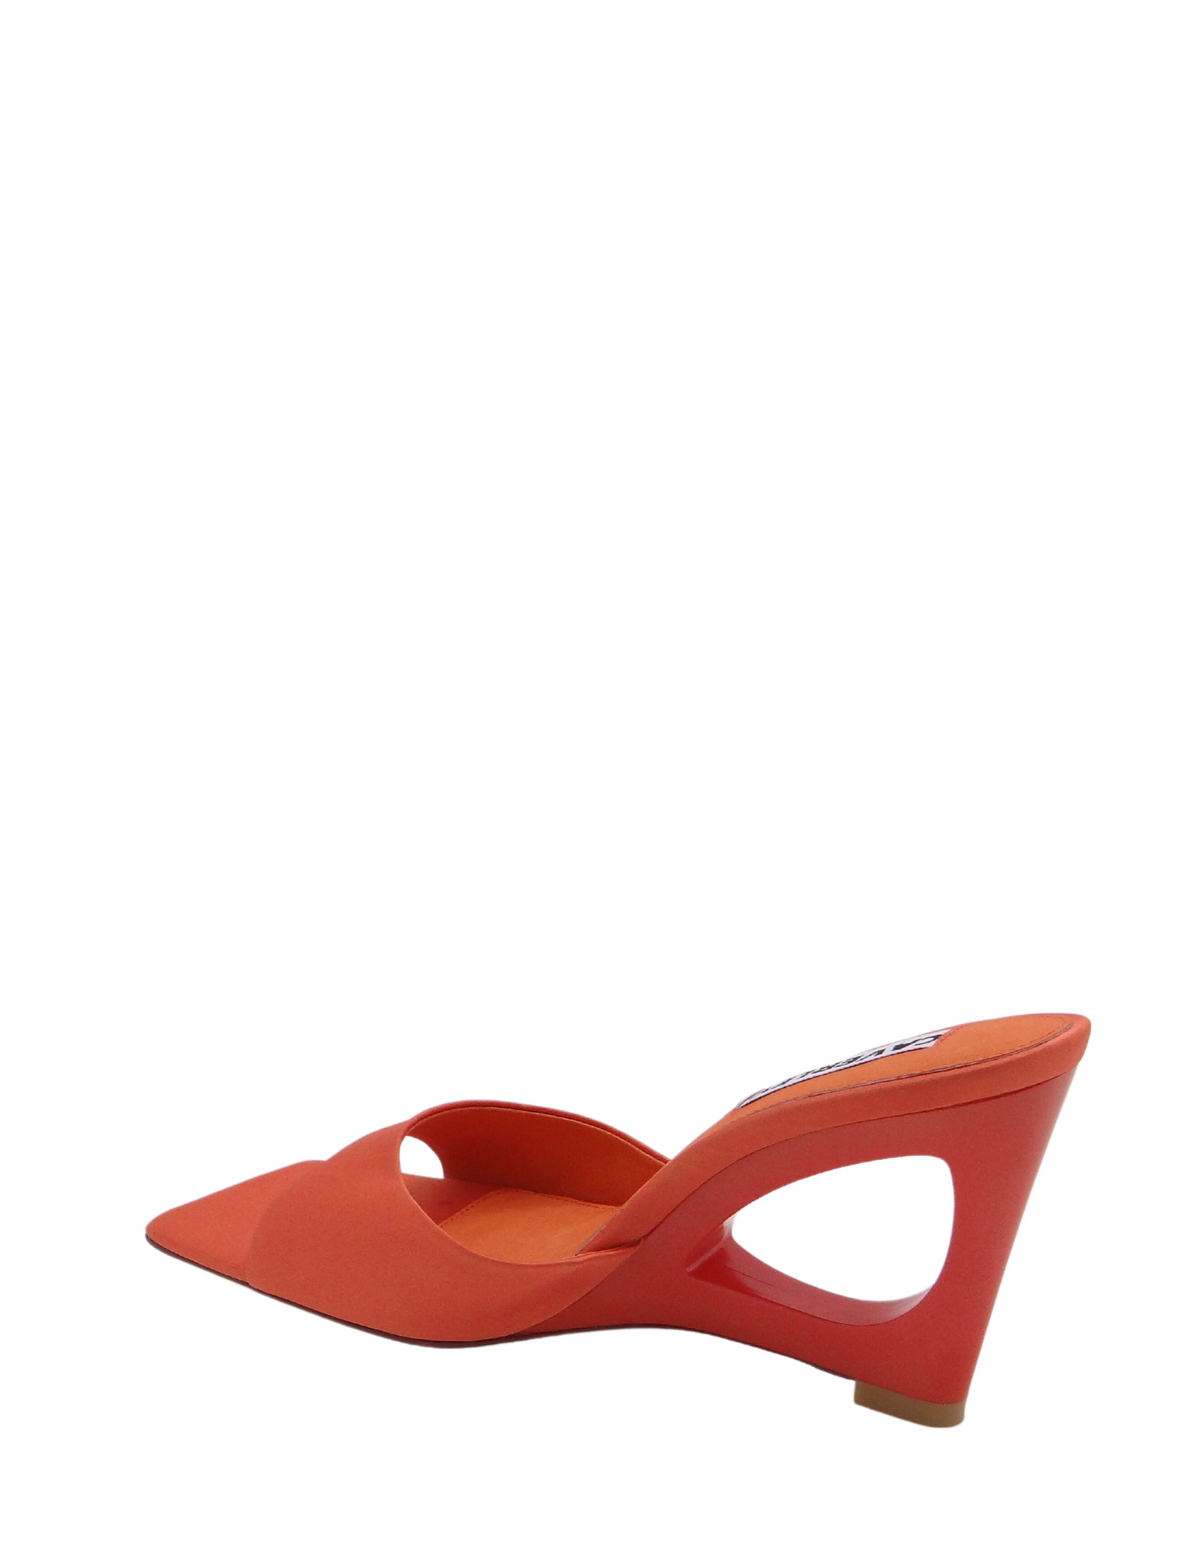 Parallel Culture Shoes and Fashion Online WEDGES CAVERLY OZI WEDGE